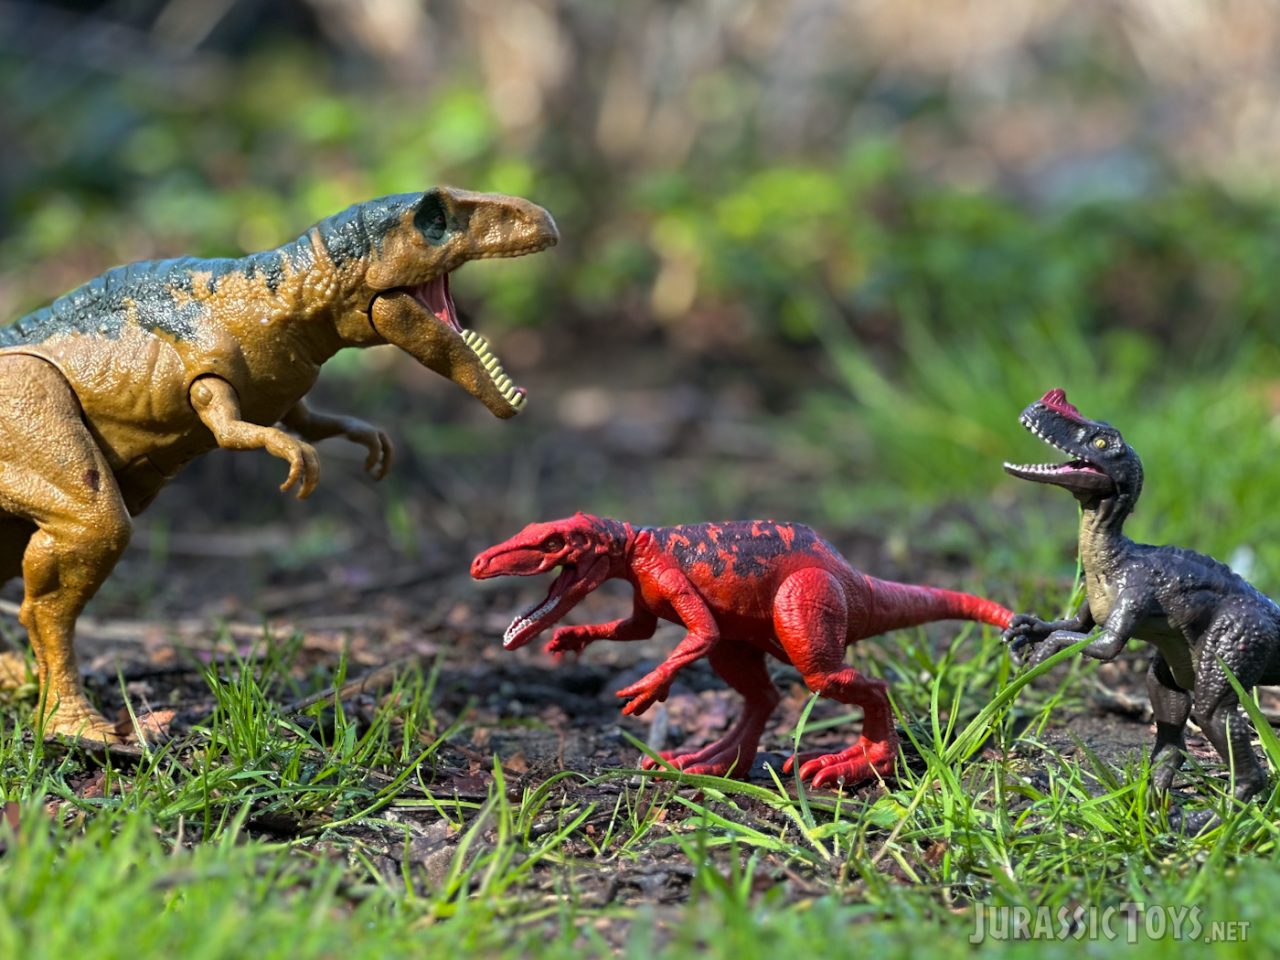 Jurassic Park’s hidden dinosaurs that were brought to life by Mattel